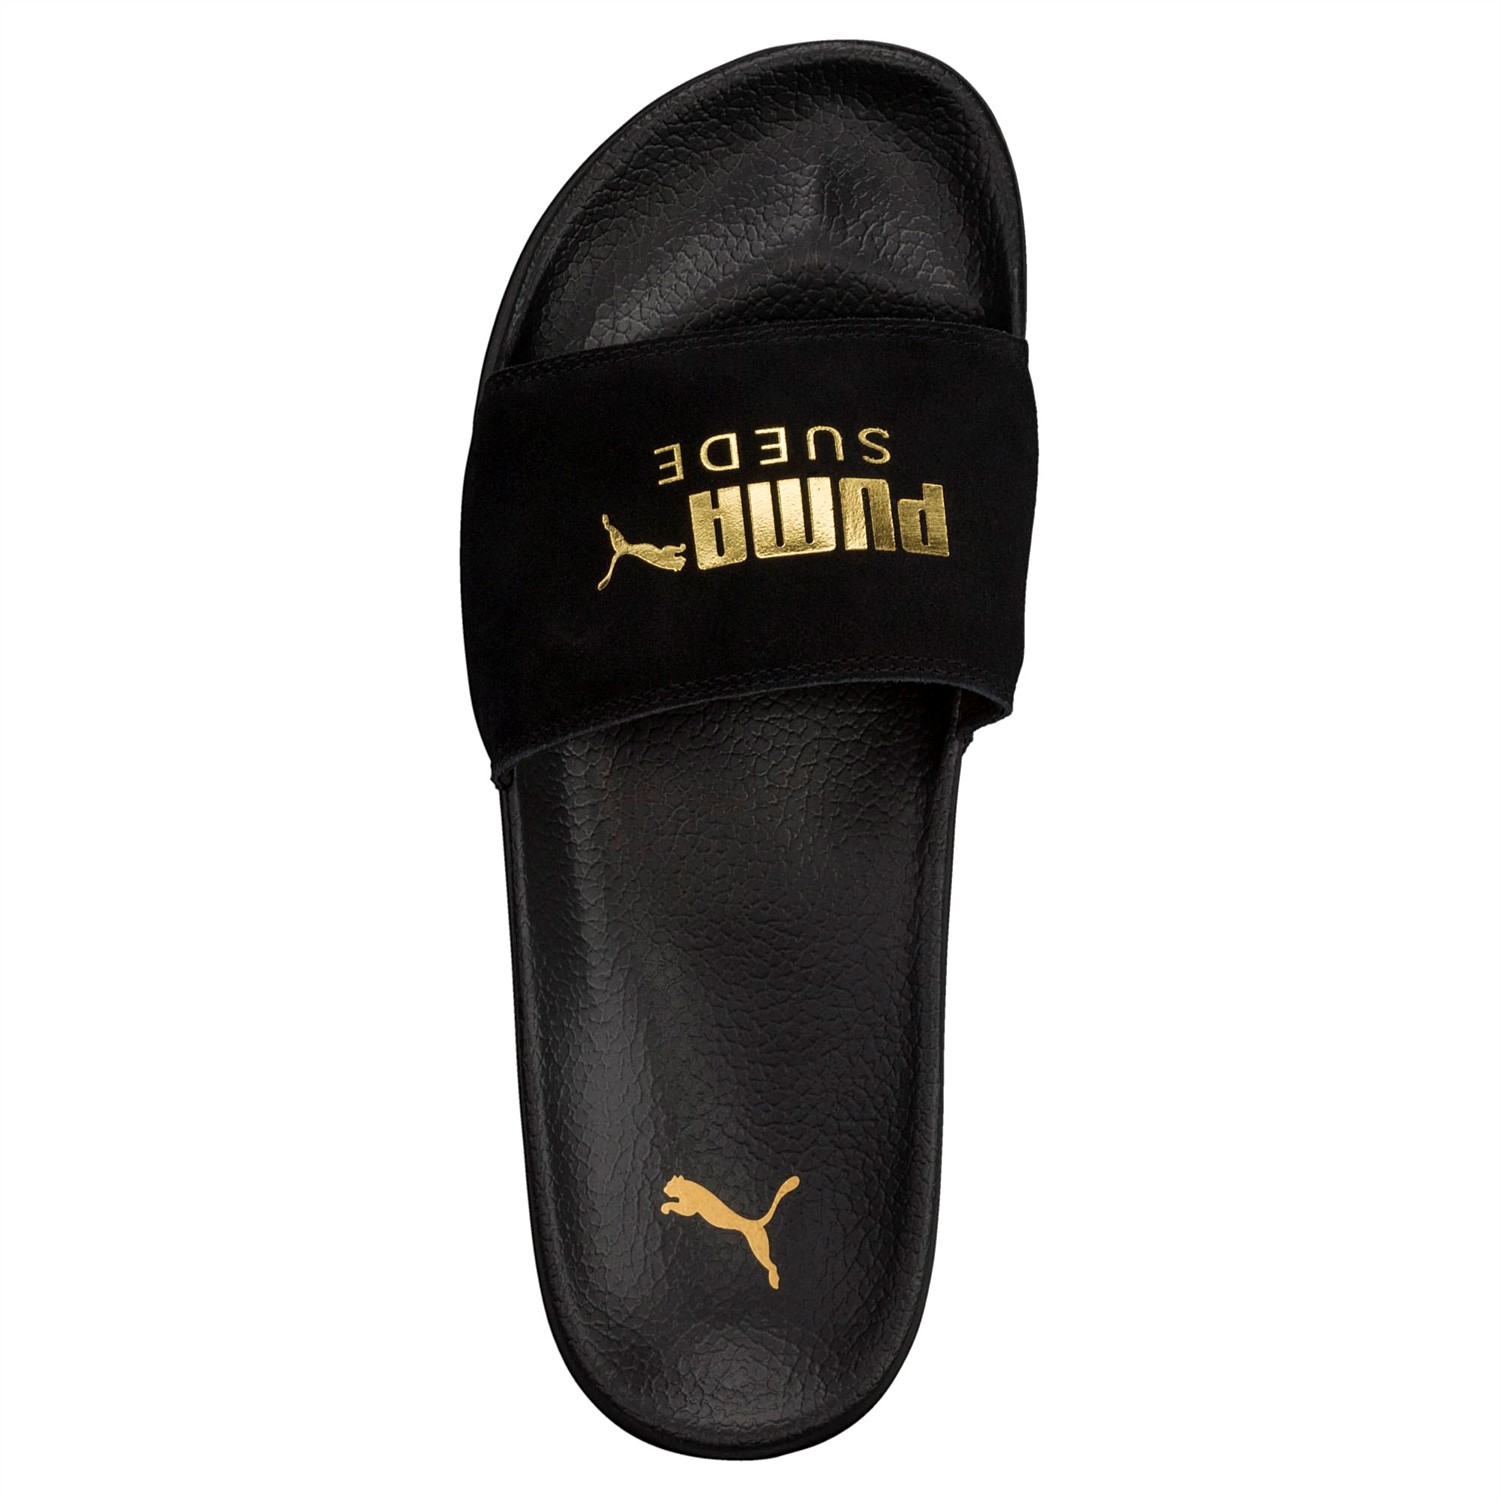 Puma | Shop Puma Training and Lifestyle Clothing, Footwear and Accessories  | Stirling Sports - Leadcat Suede Slides Unisex